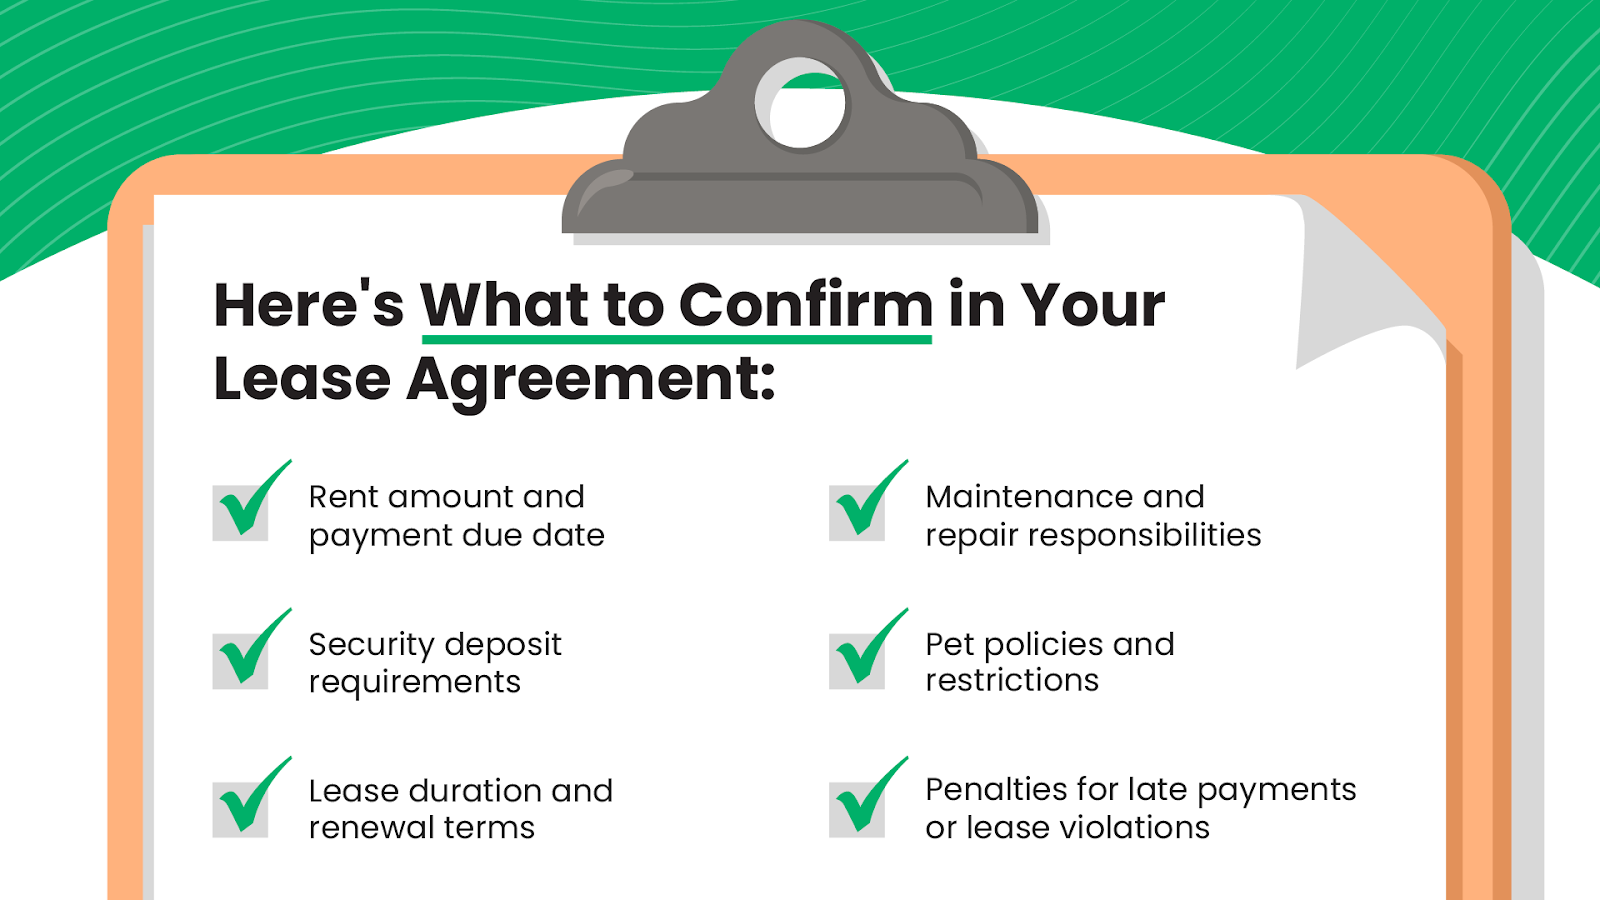 What to confirm in your lease agreement for landlord-tenant laws in PA. 